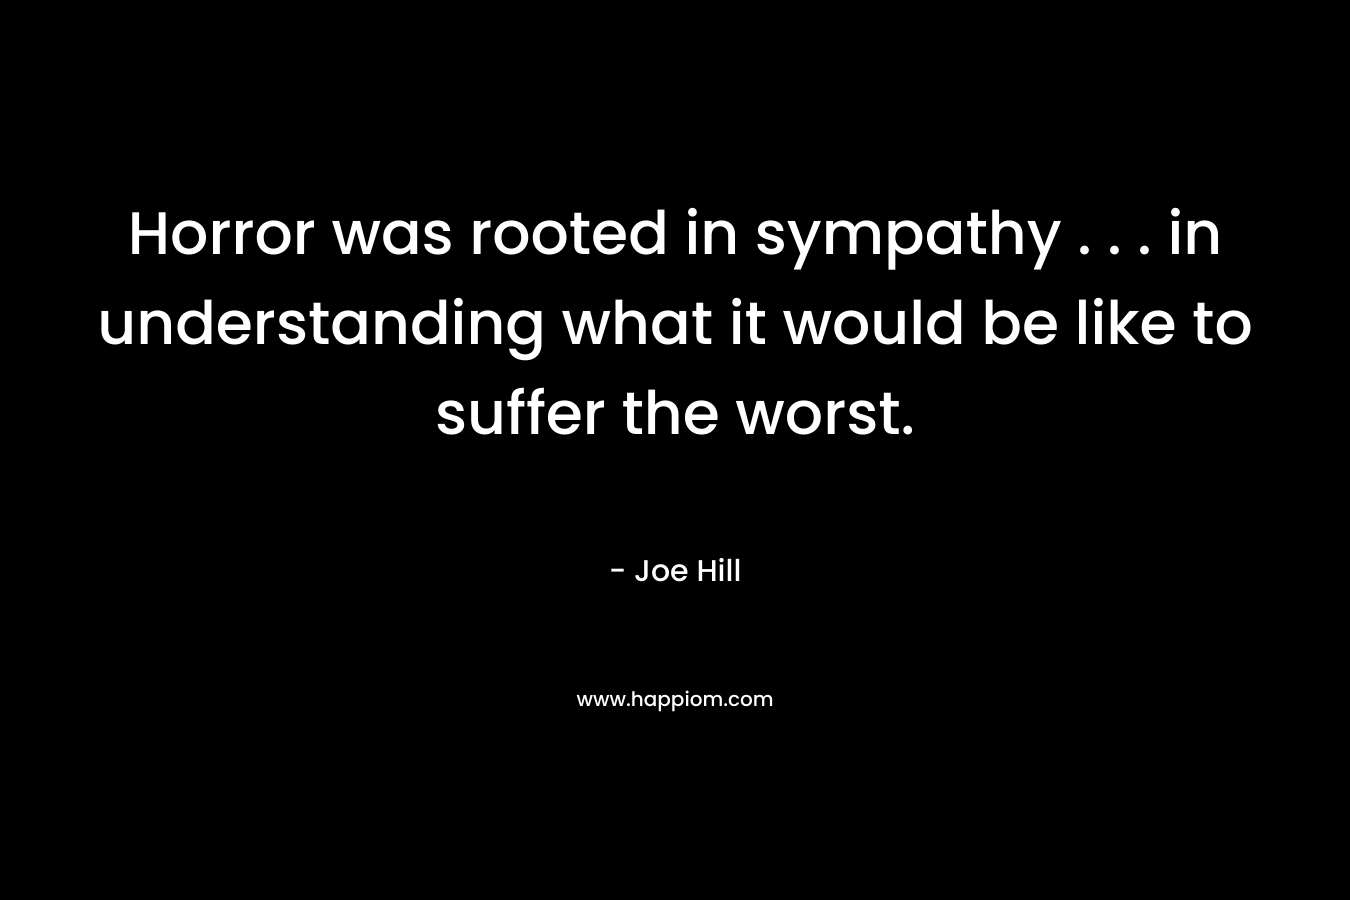 Horror was rooted in sympathy . . . in understanding what it would be like to suffer the worst.